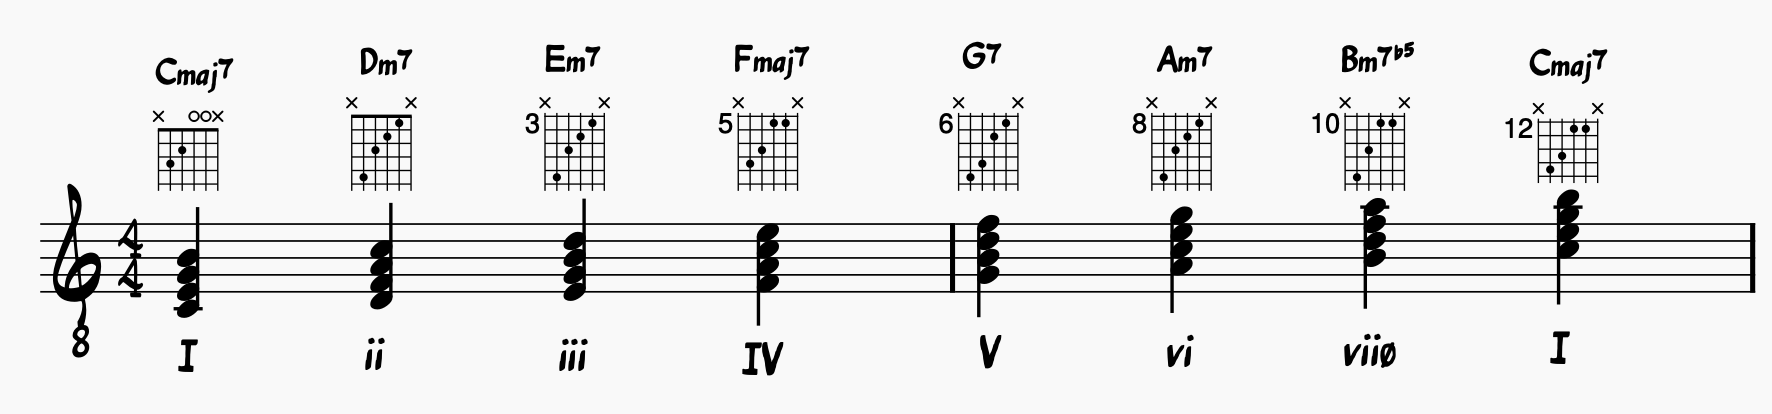 Jazz Guitar: Diatonic 7th chords in the Key of C major